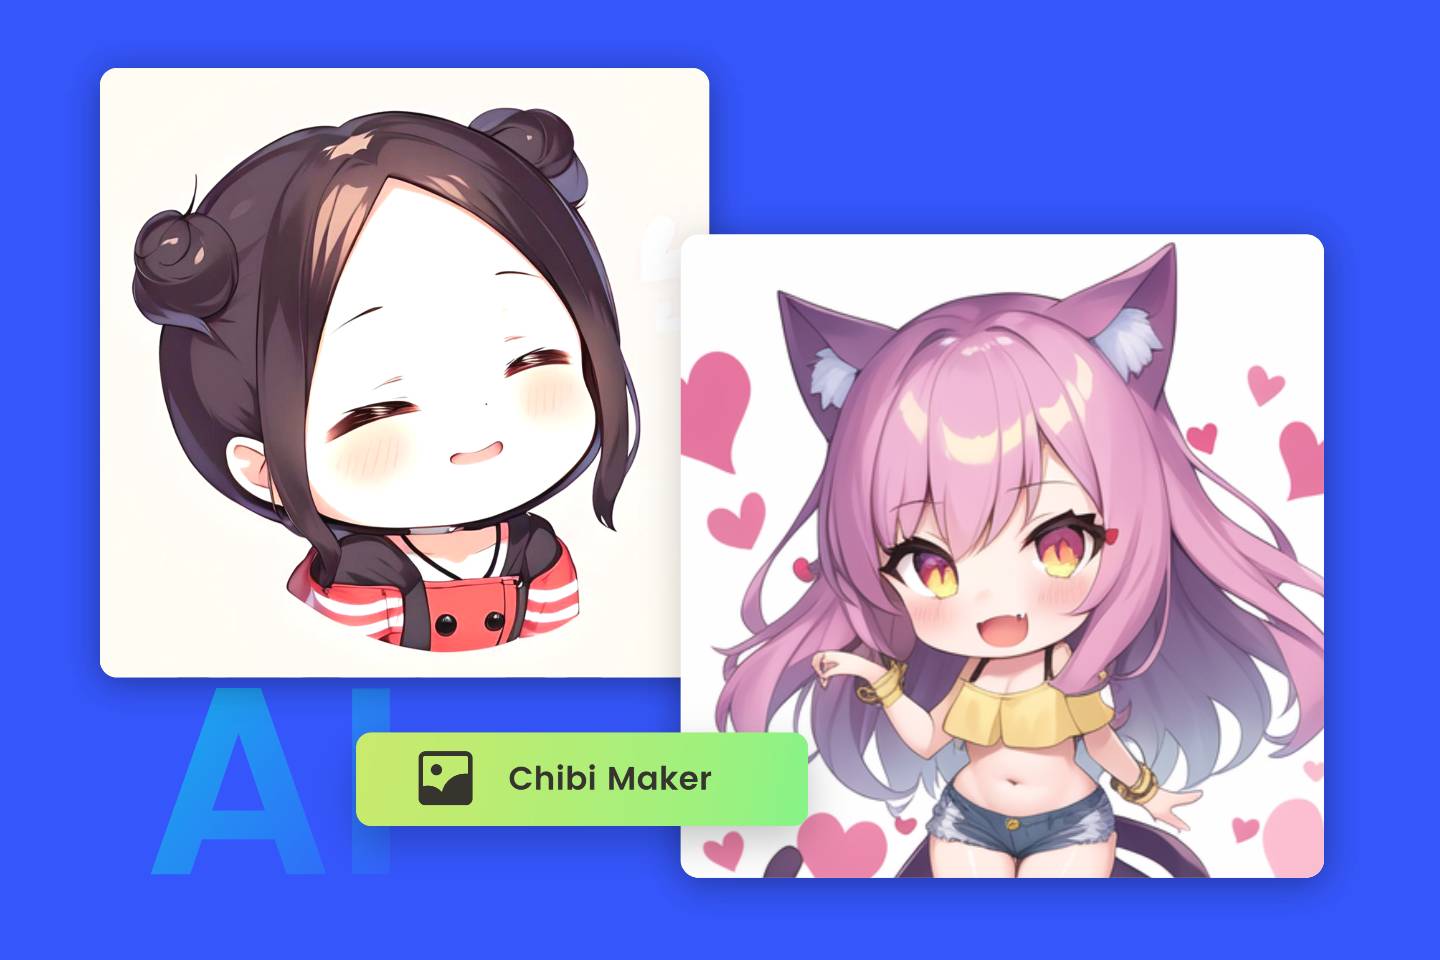 Create chibi characters and chibi art online in seconds with Fotor's chibi maker